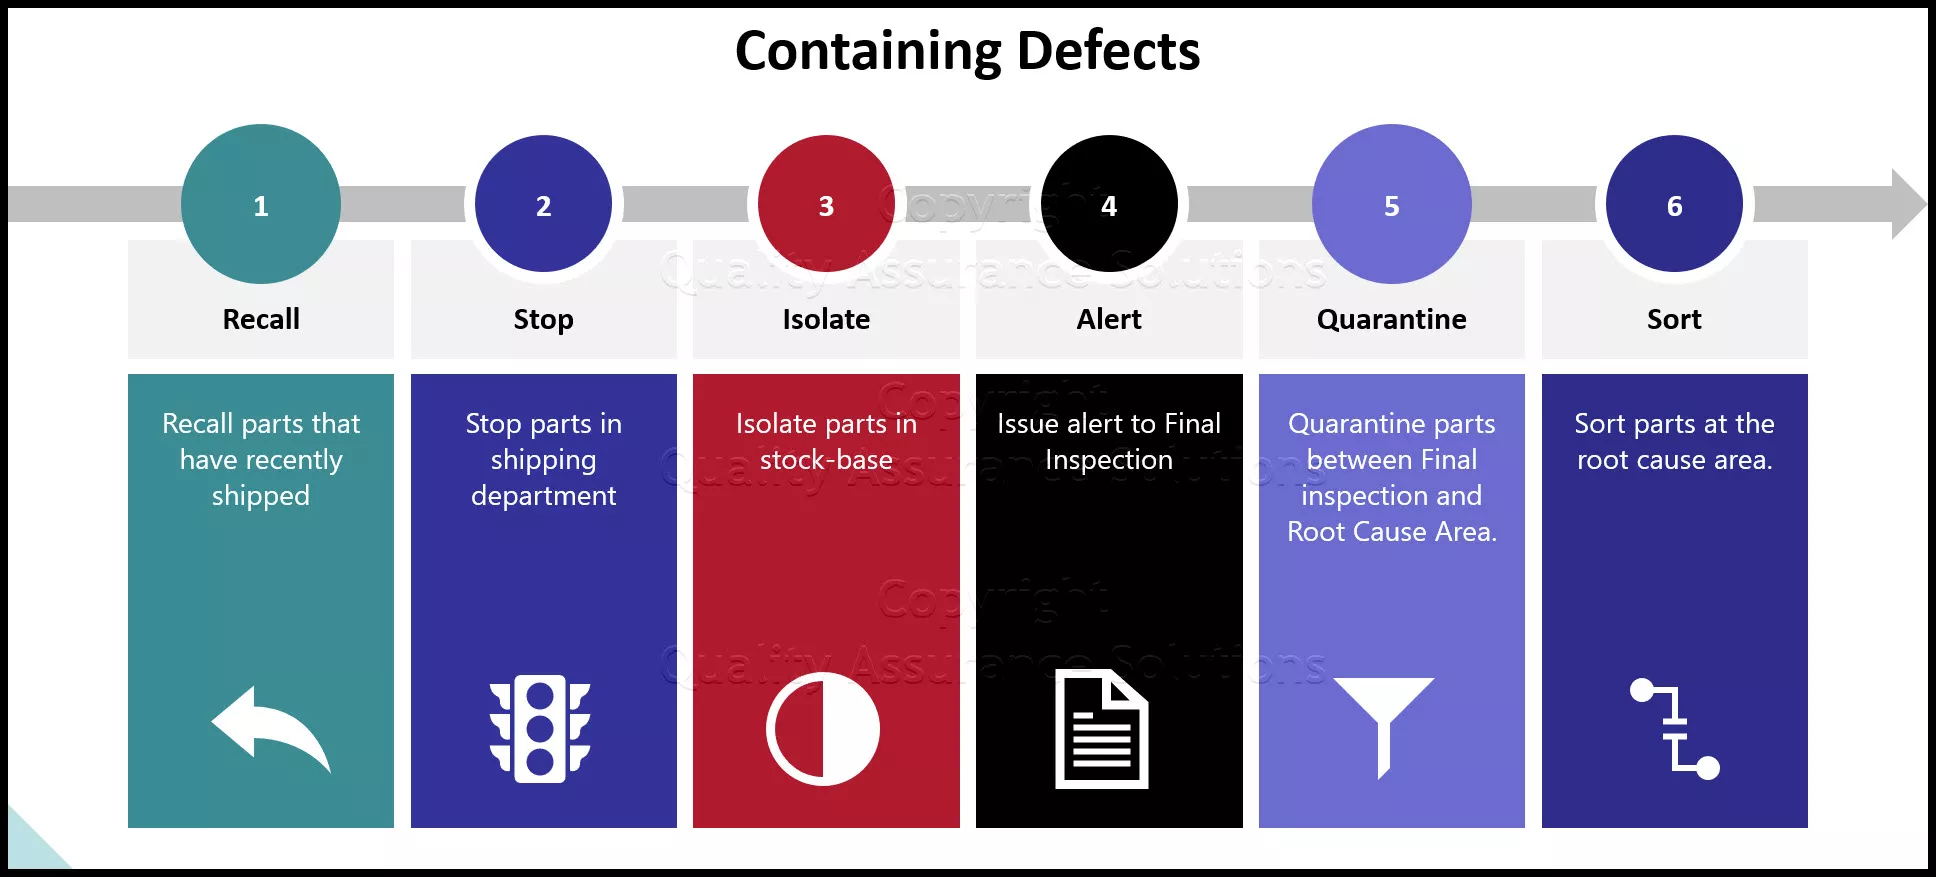 Execution of containment theory prevents escaping defects and improves customer satisfaction. We describe the best approaches to containing defects. 